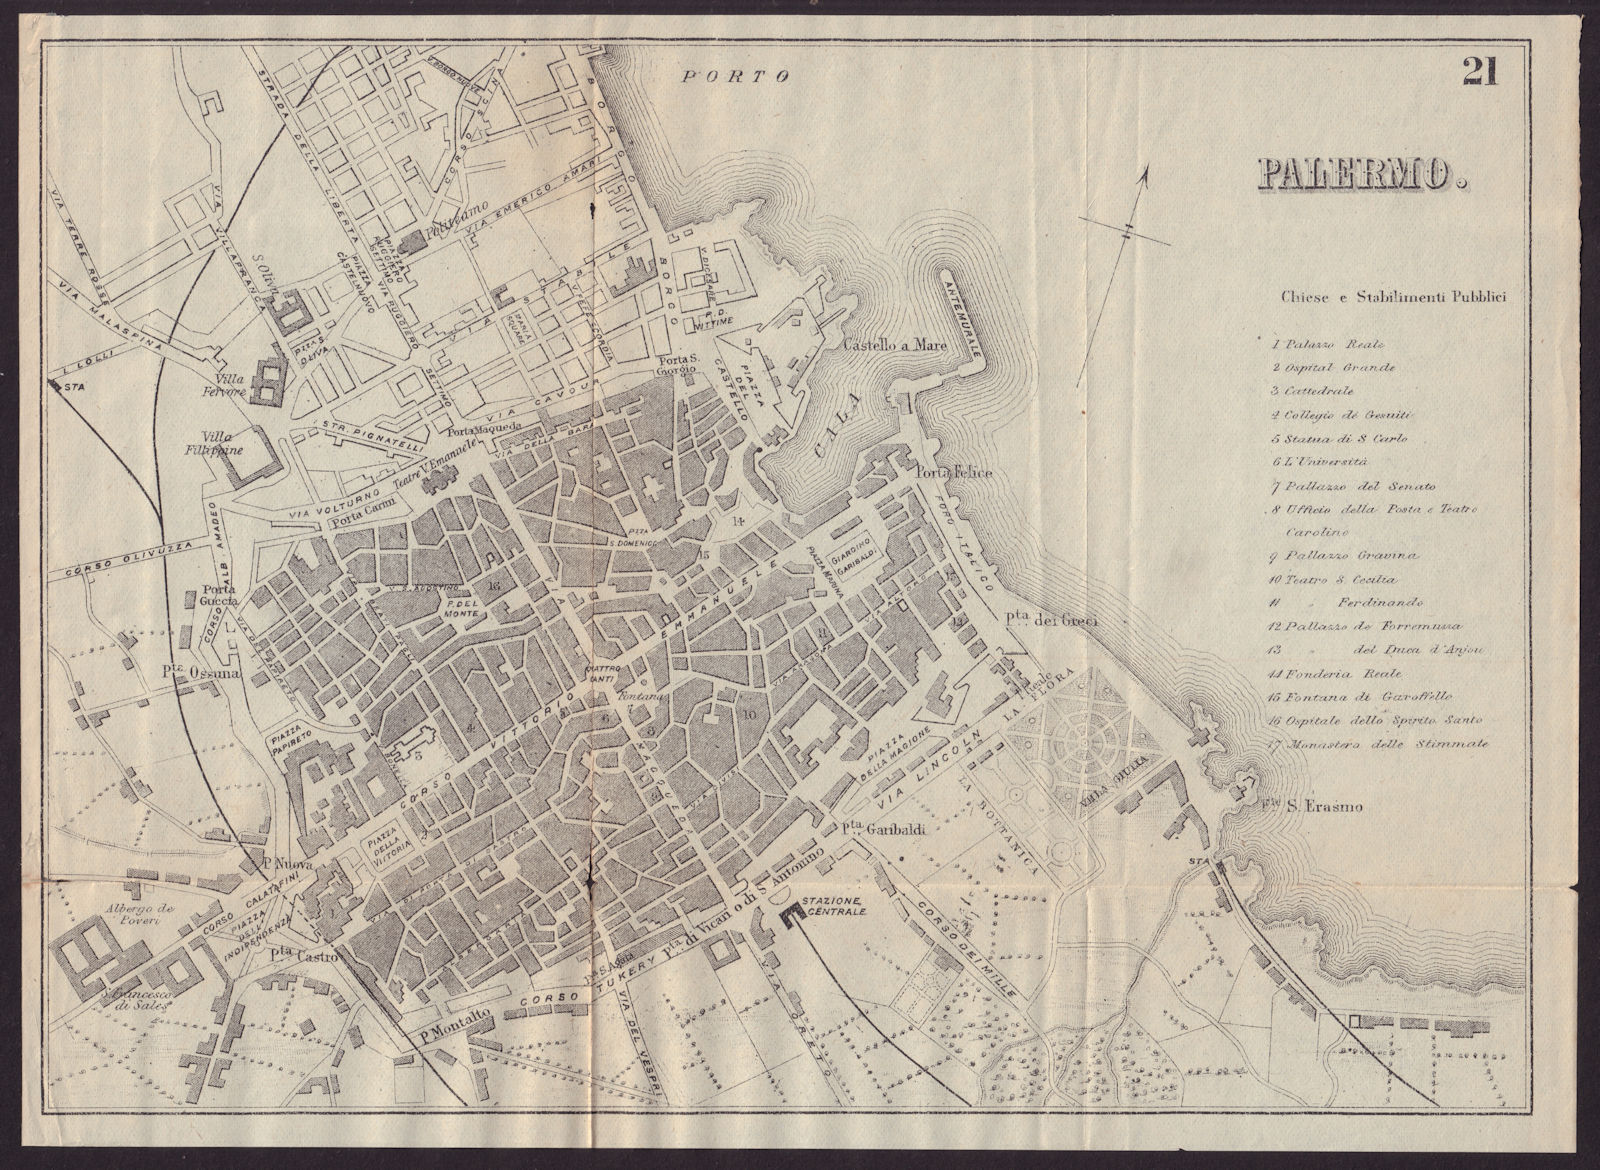 PALERMO antique town plan city map. Italy. BRADSHAW c1899 old